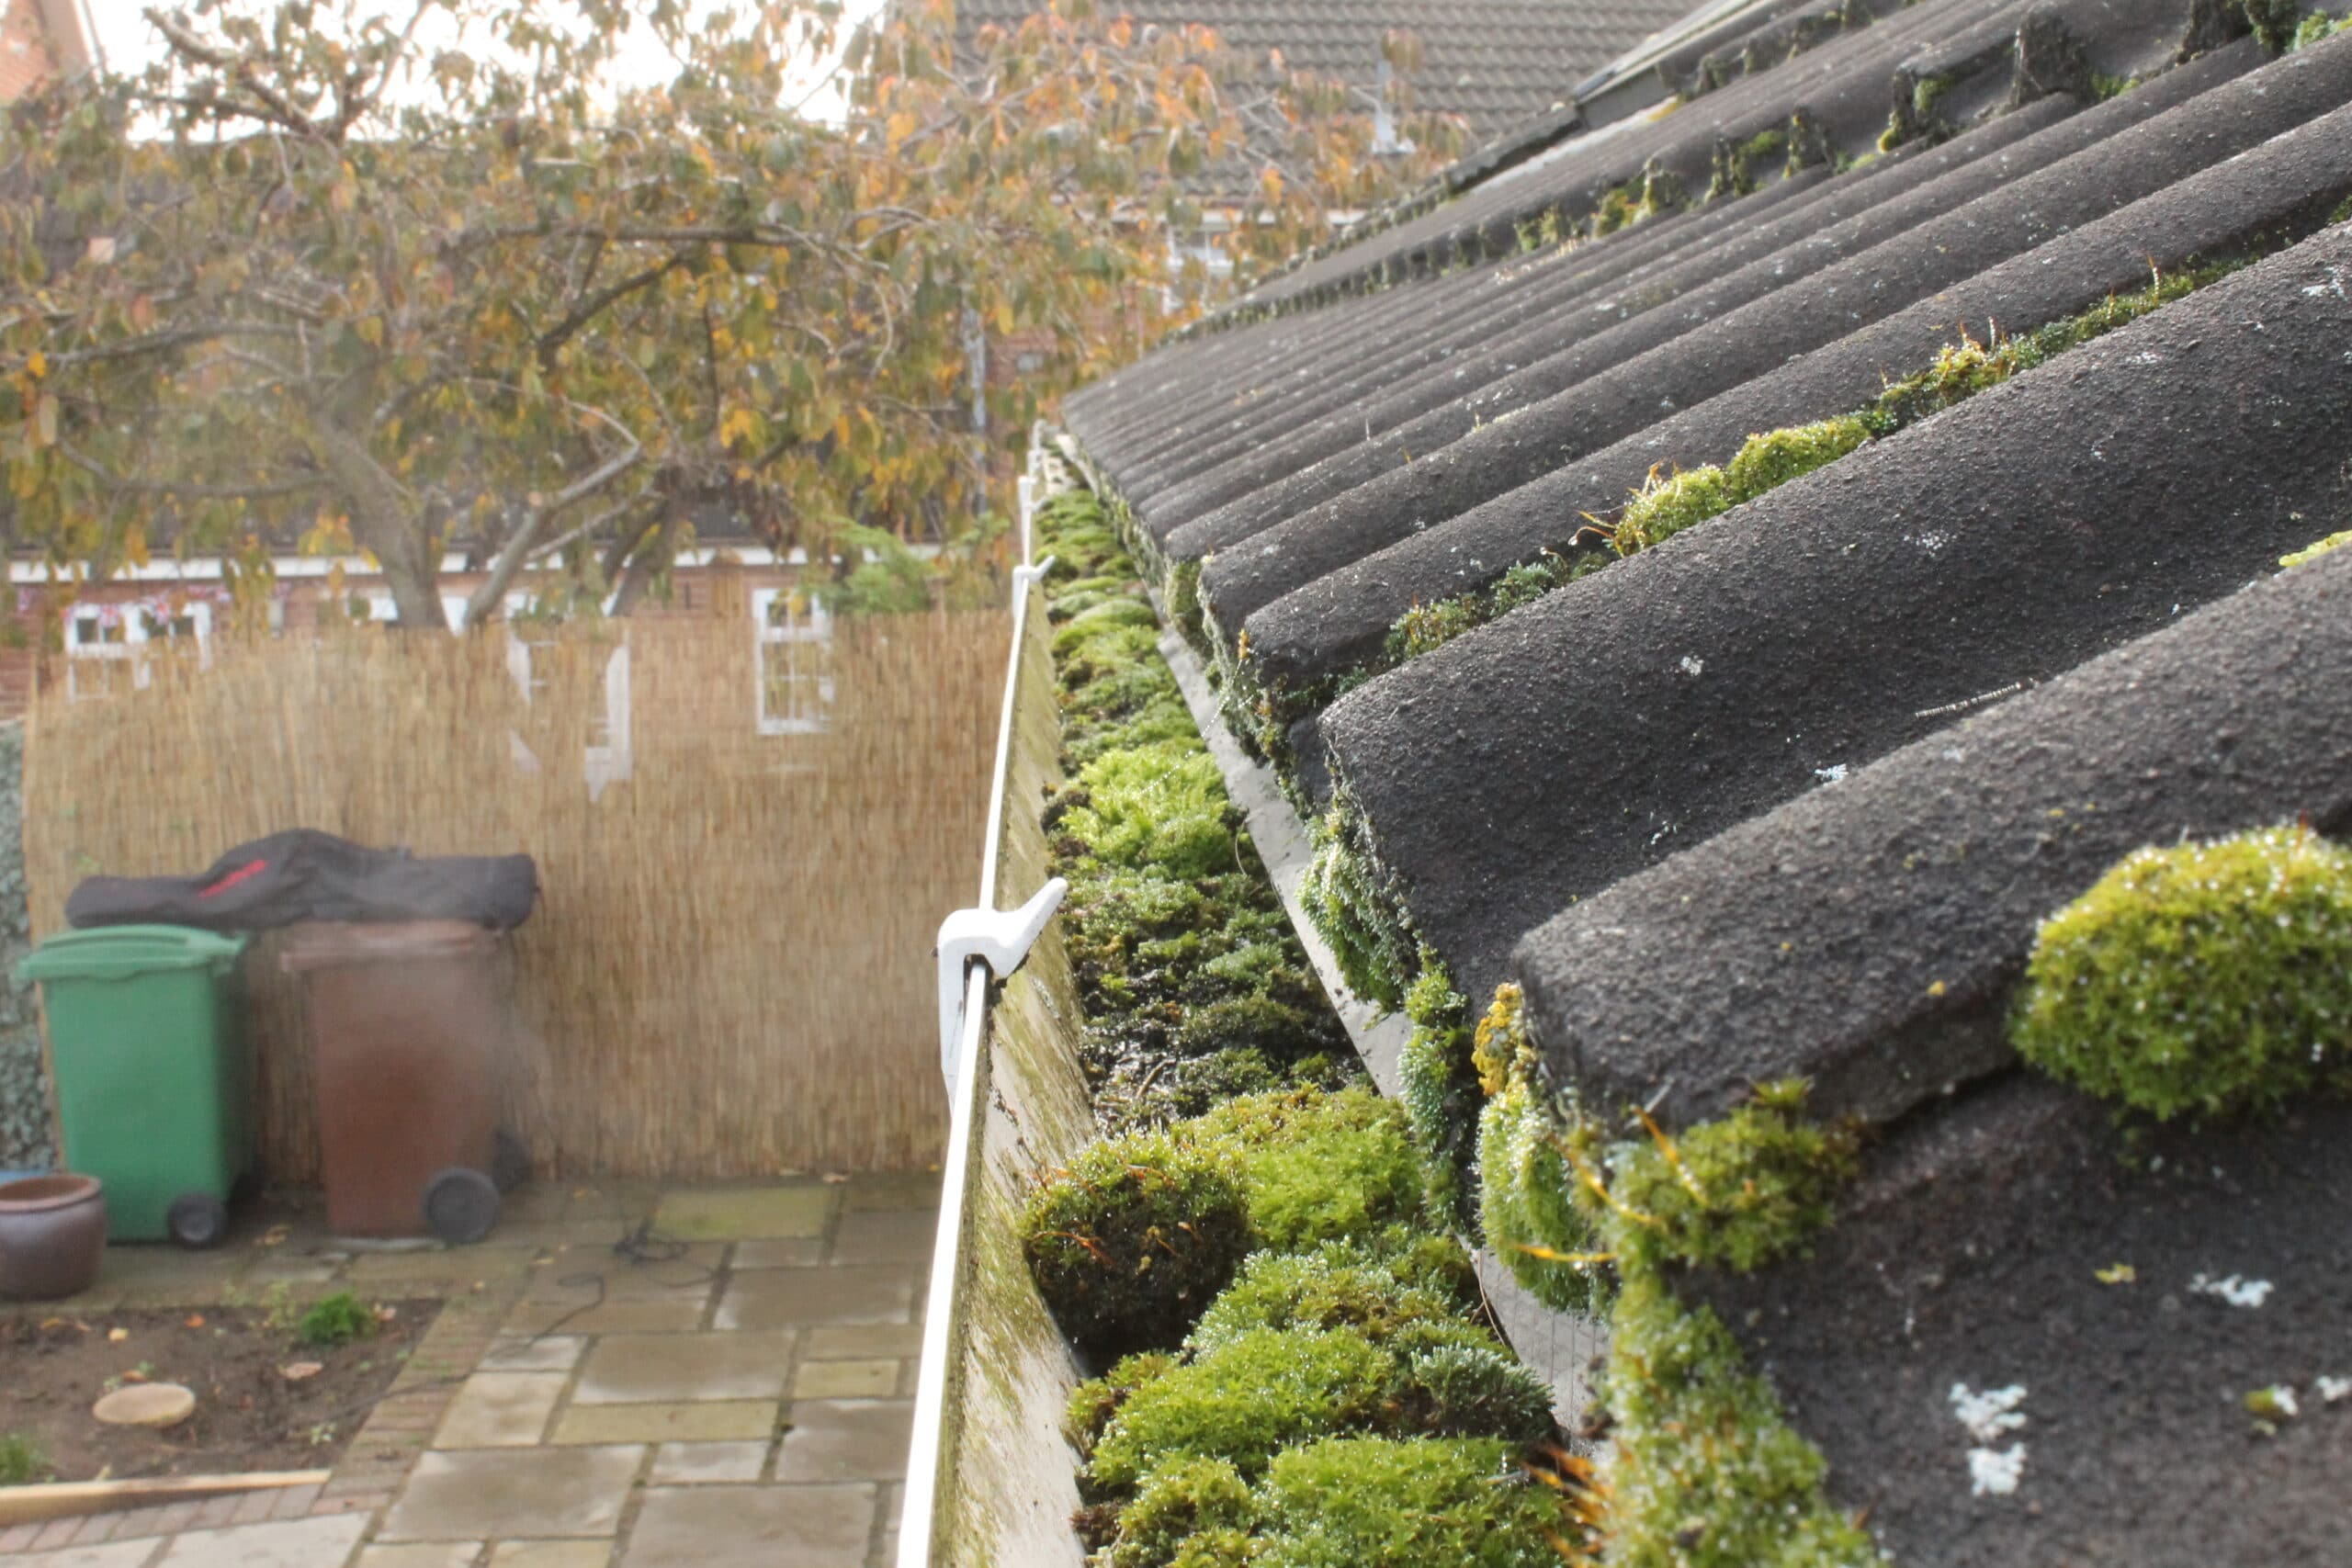 Gutter Cleaning Sudbury - Get Your Free Gutter Cleaning Quote Now